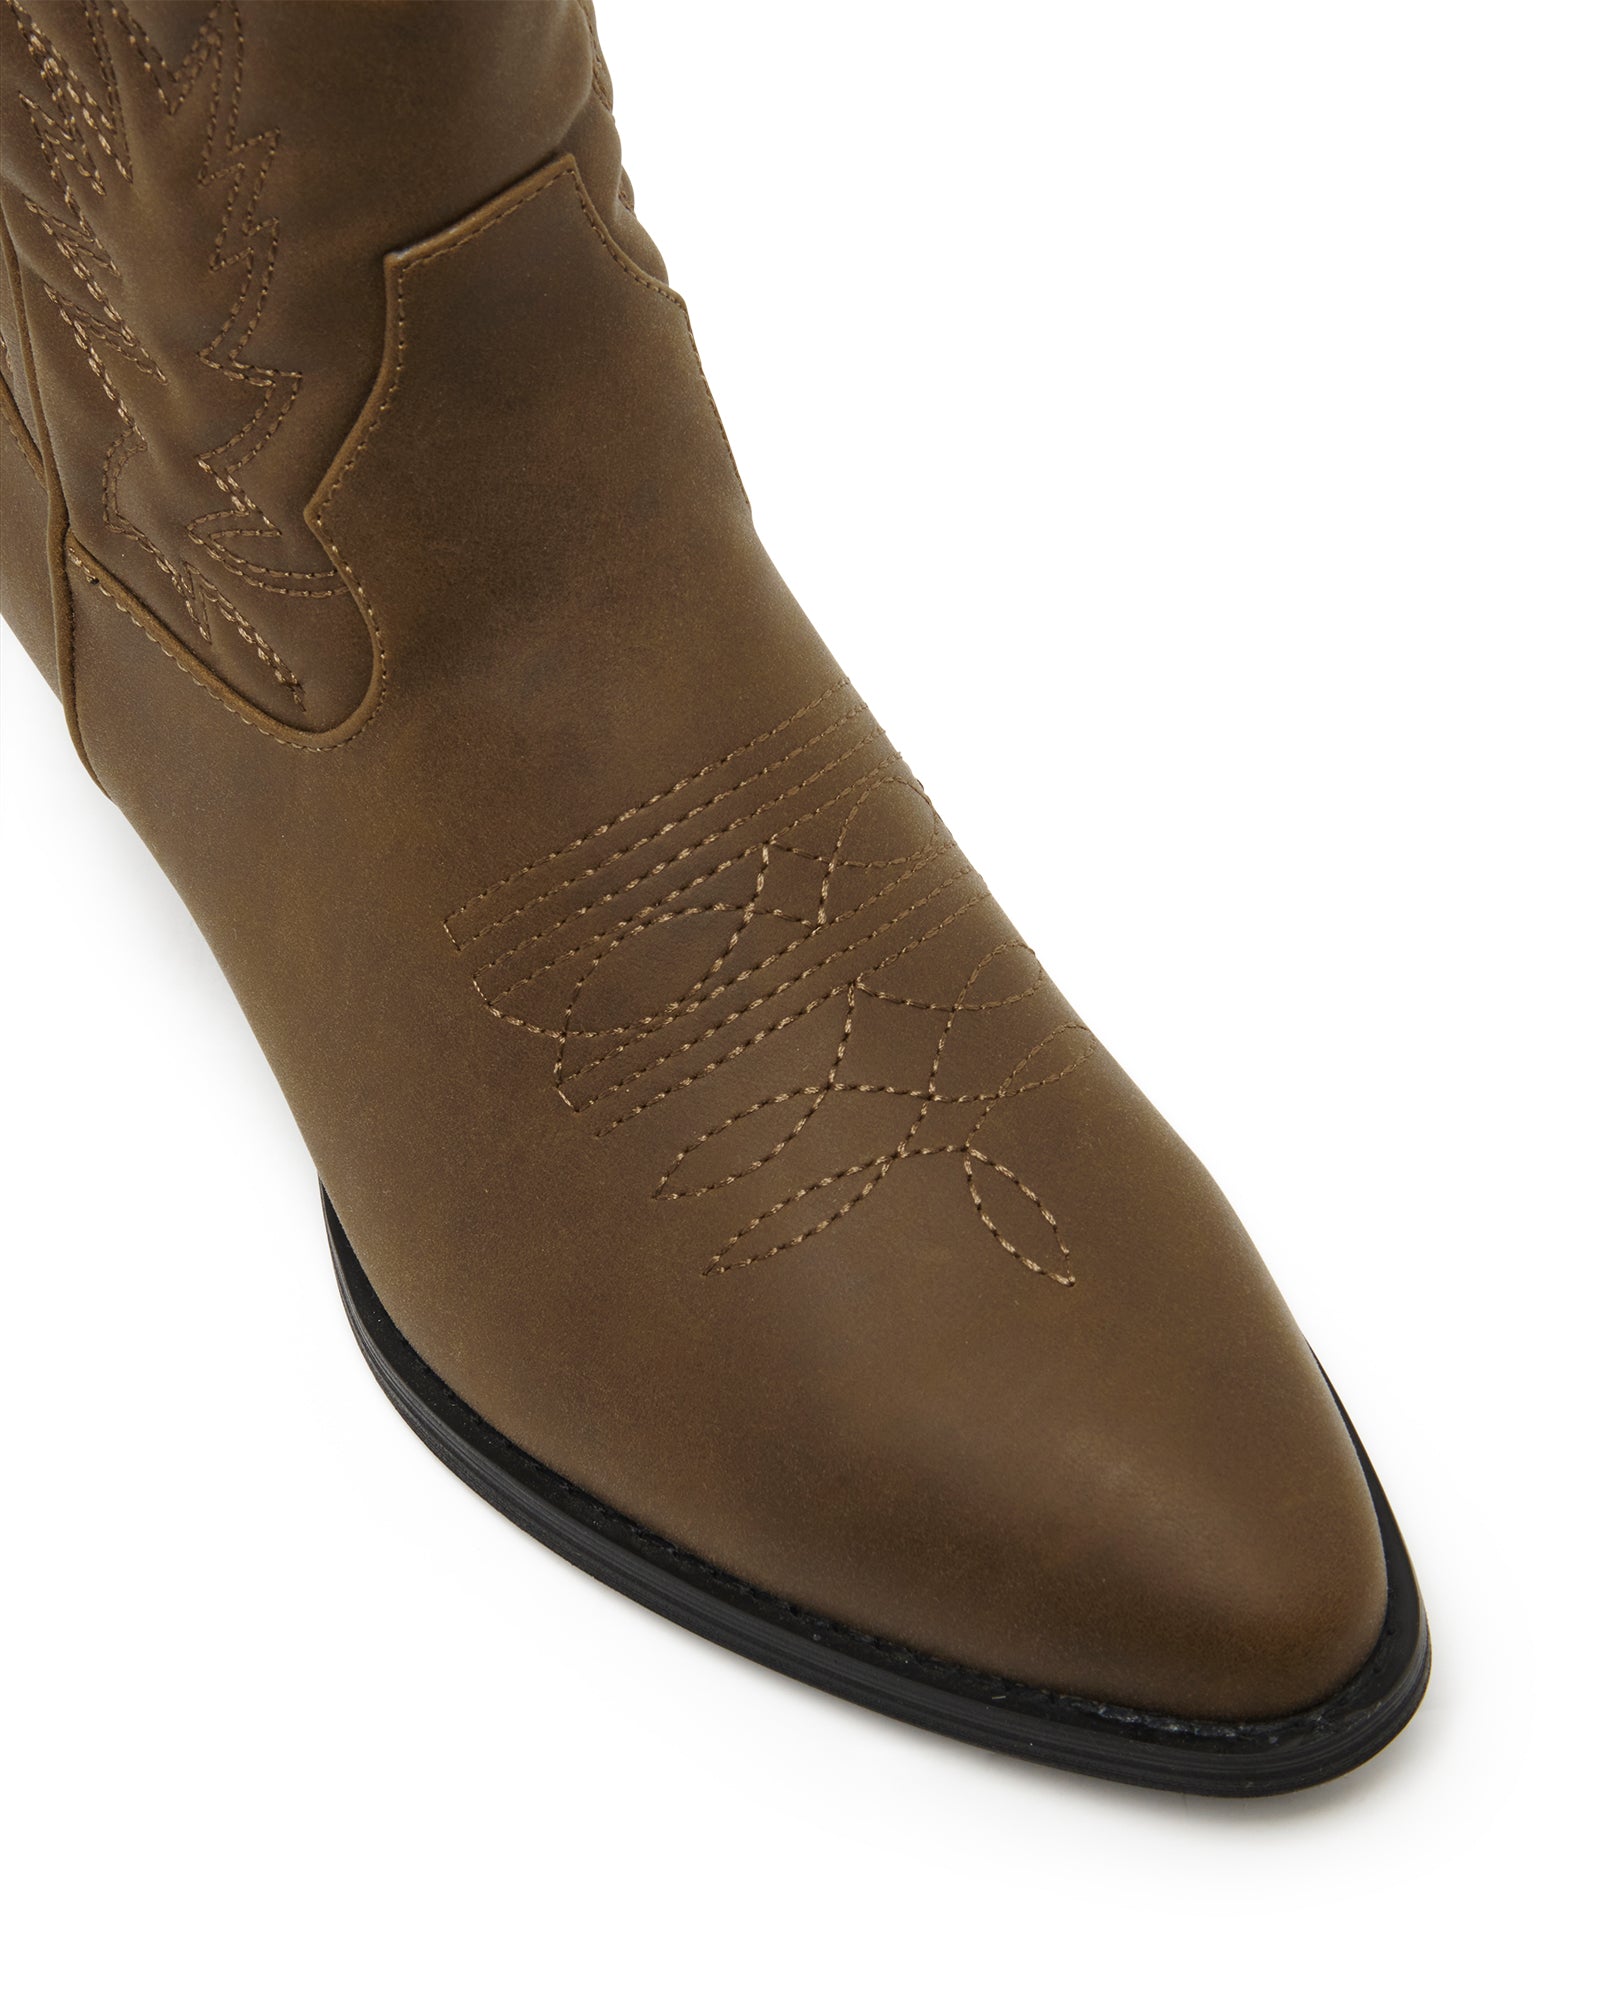 Therapy Shoes Wilder Cocoa Nubuck | Women's Boots | Western | Cowboy | Short